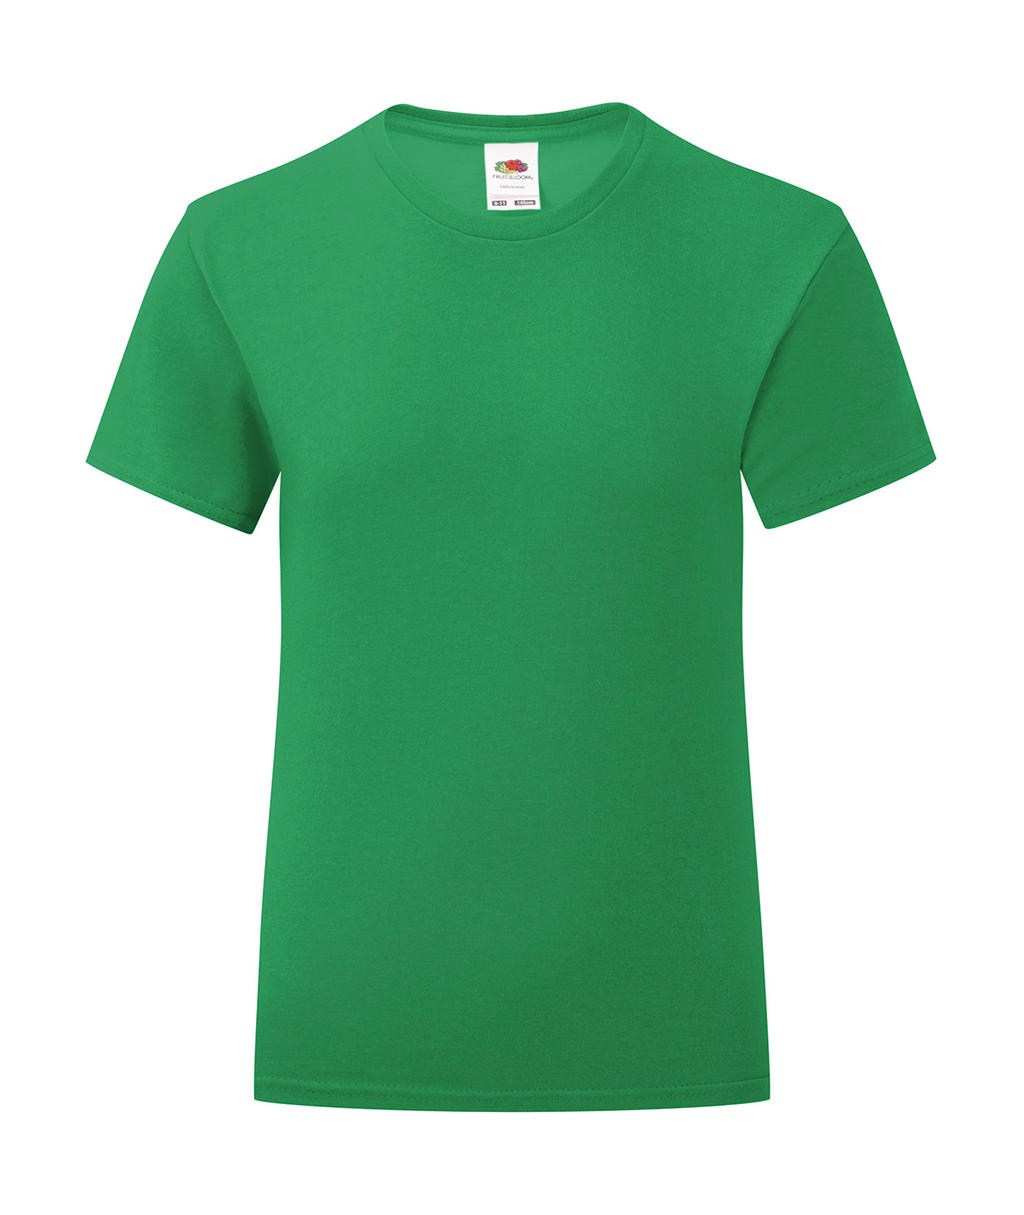  Girls Iconic 150 T in Farbe Kelly Green